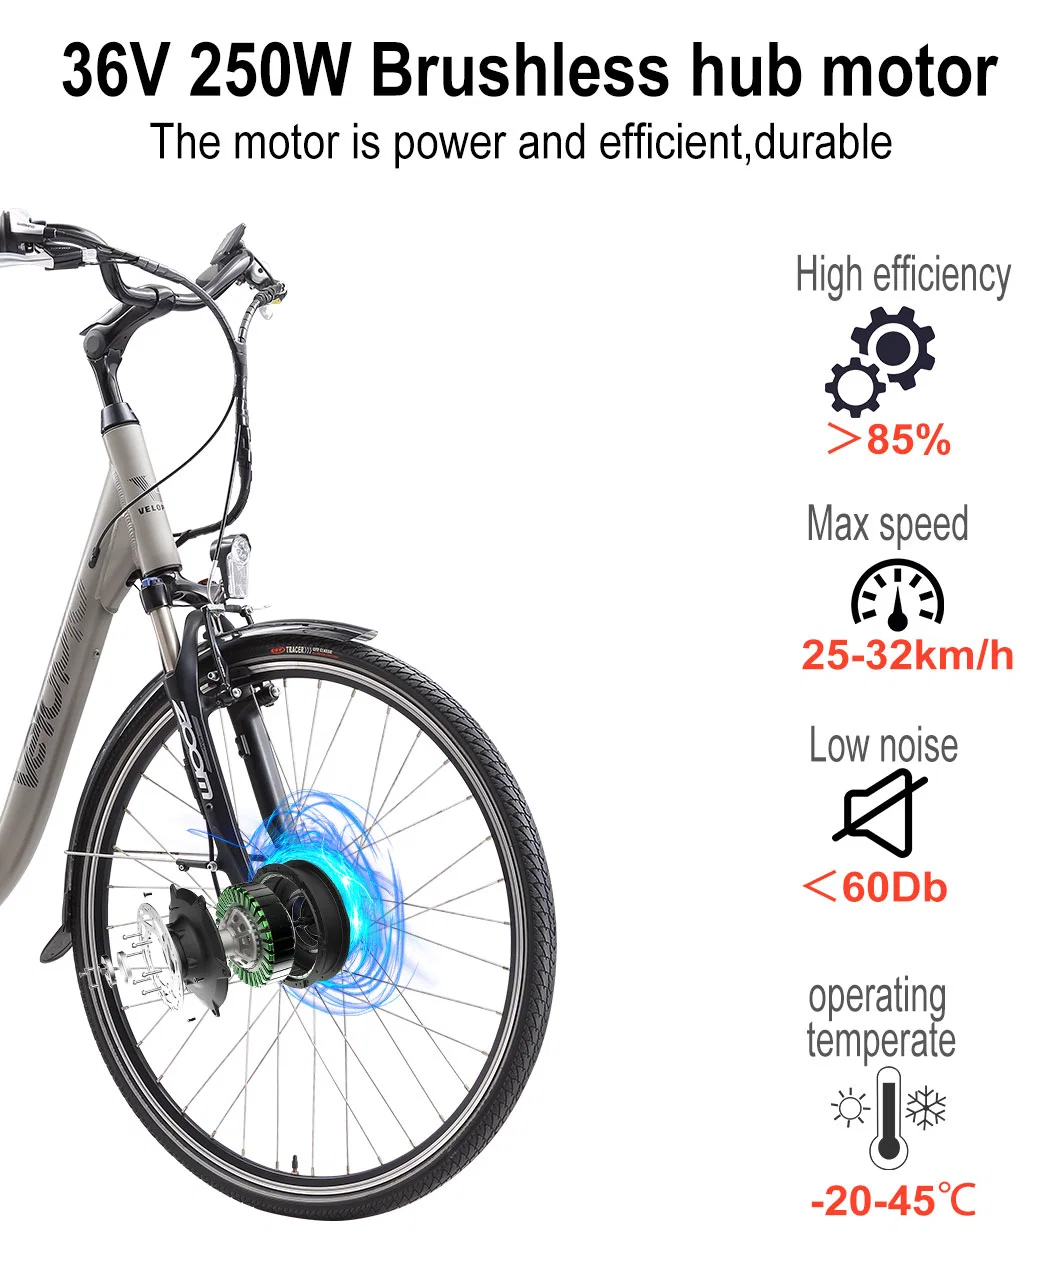 Electric Scooter Bike 250W Front Motor Bicycle